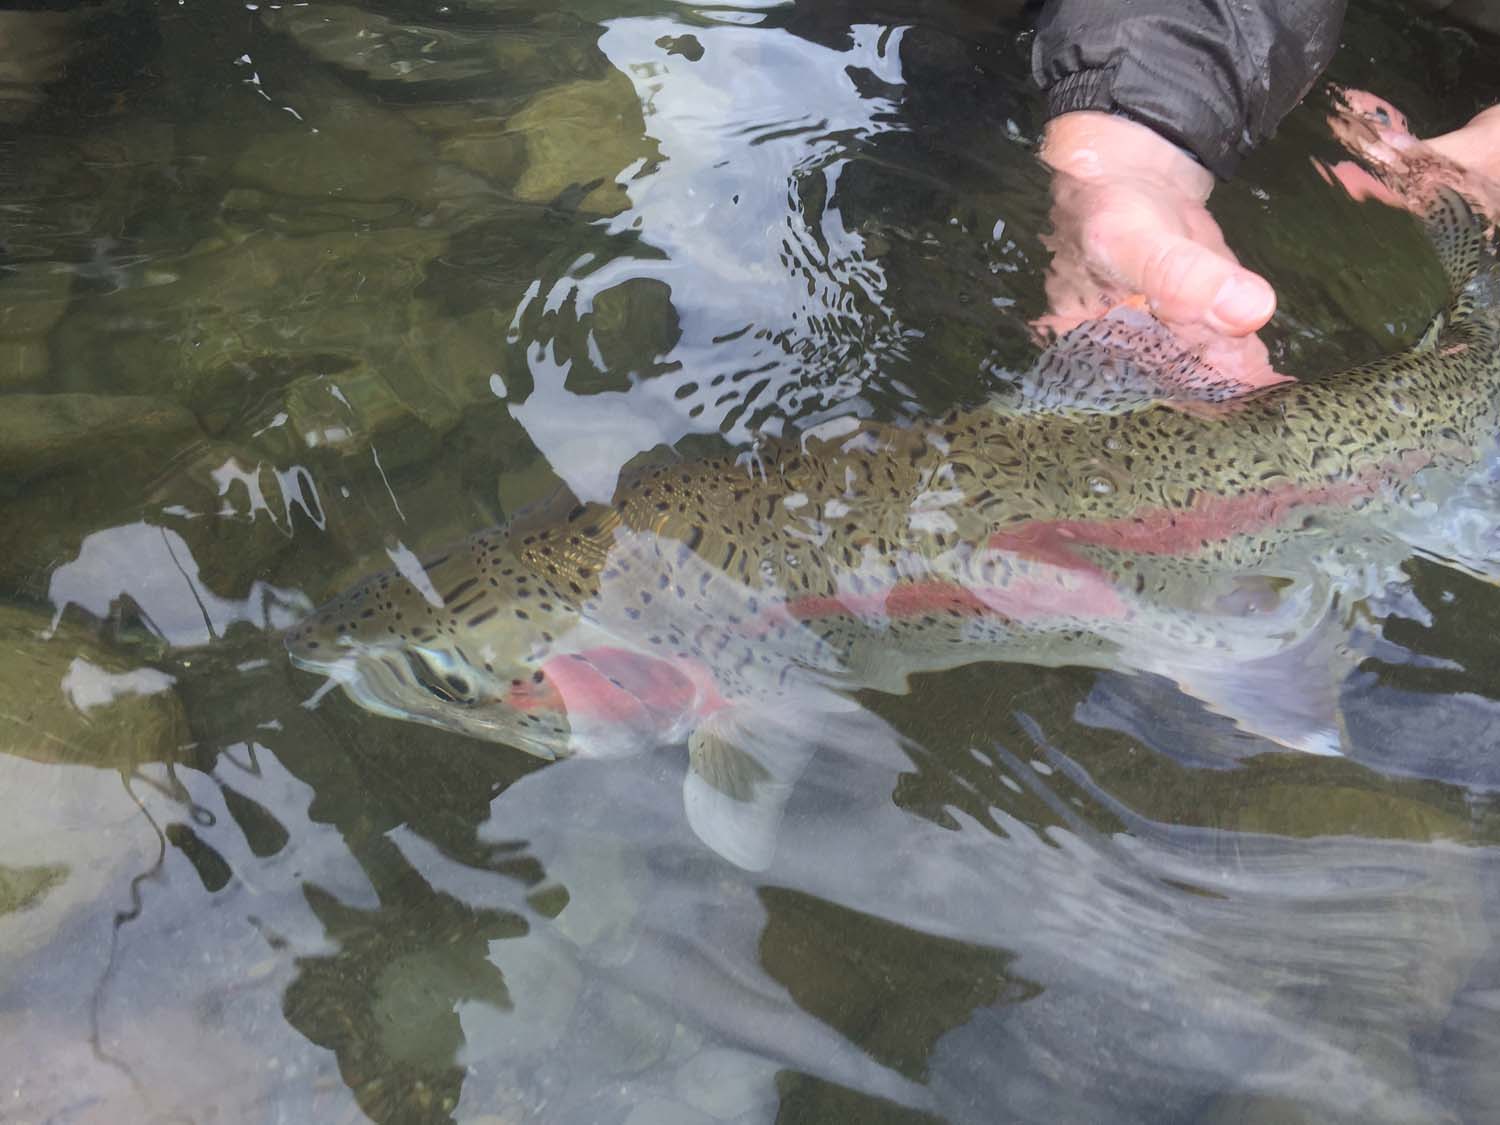 Release of a Squamish Rainbow Trout